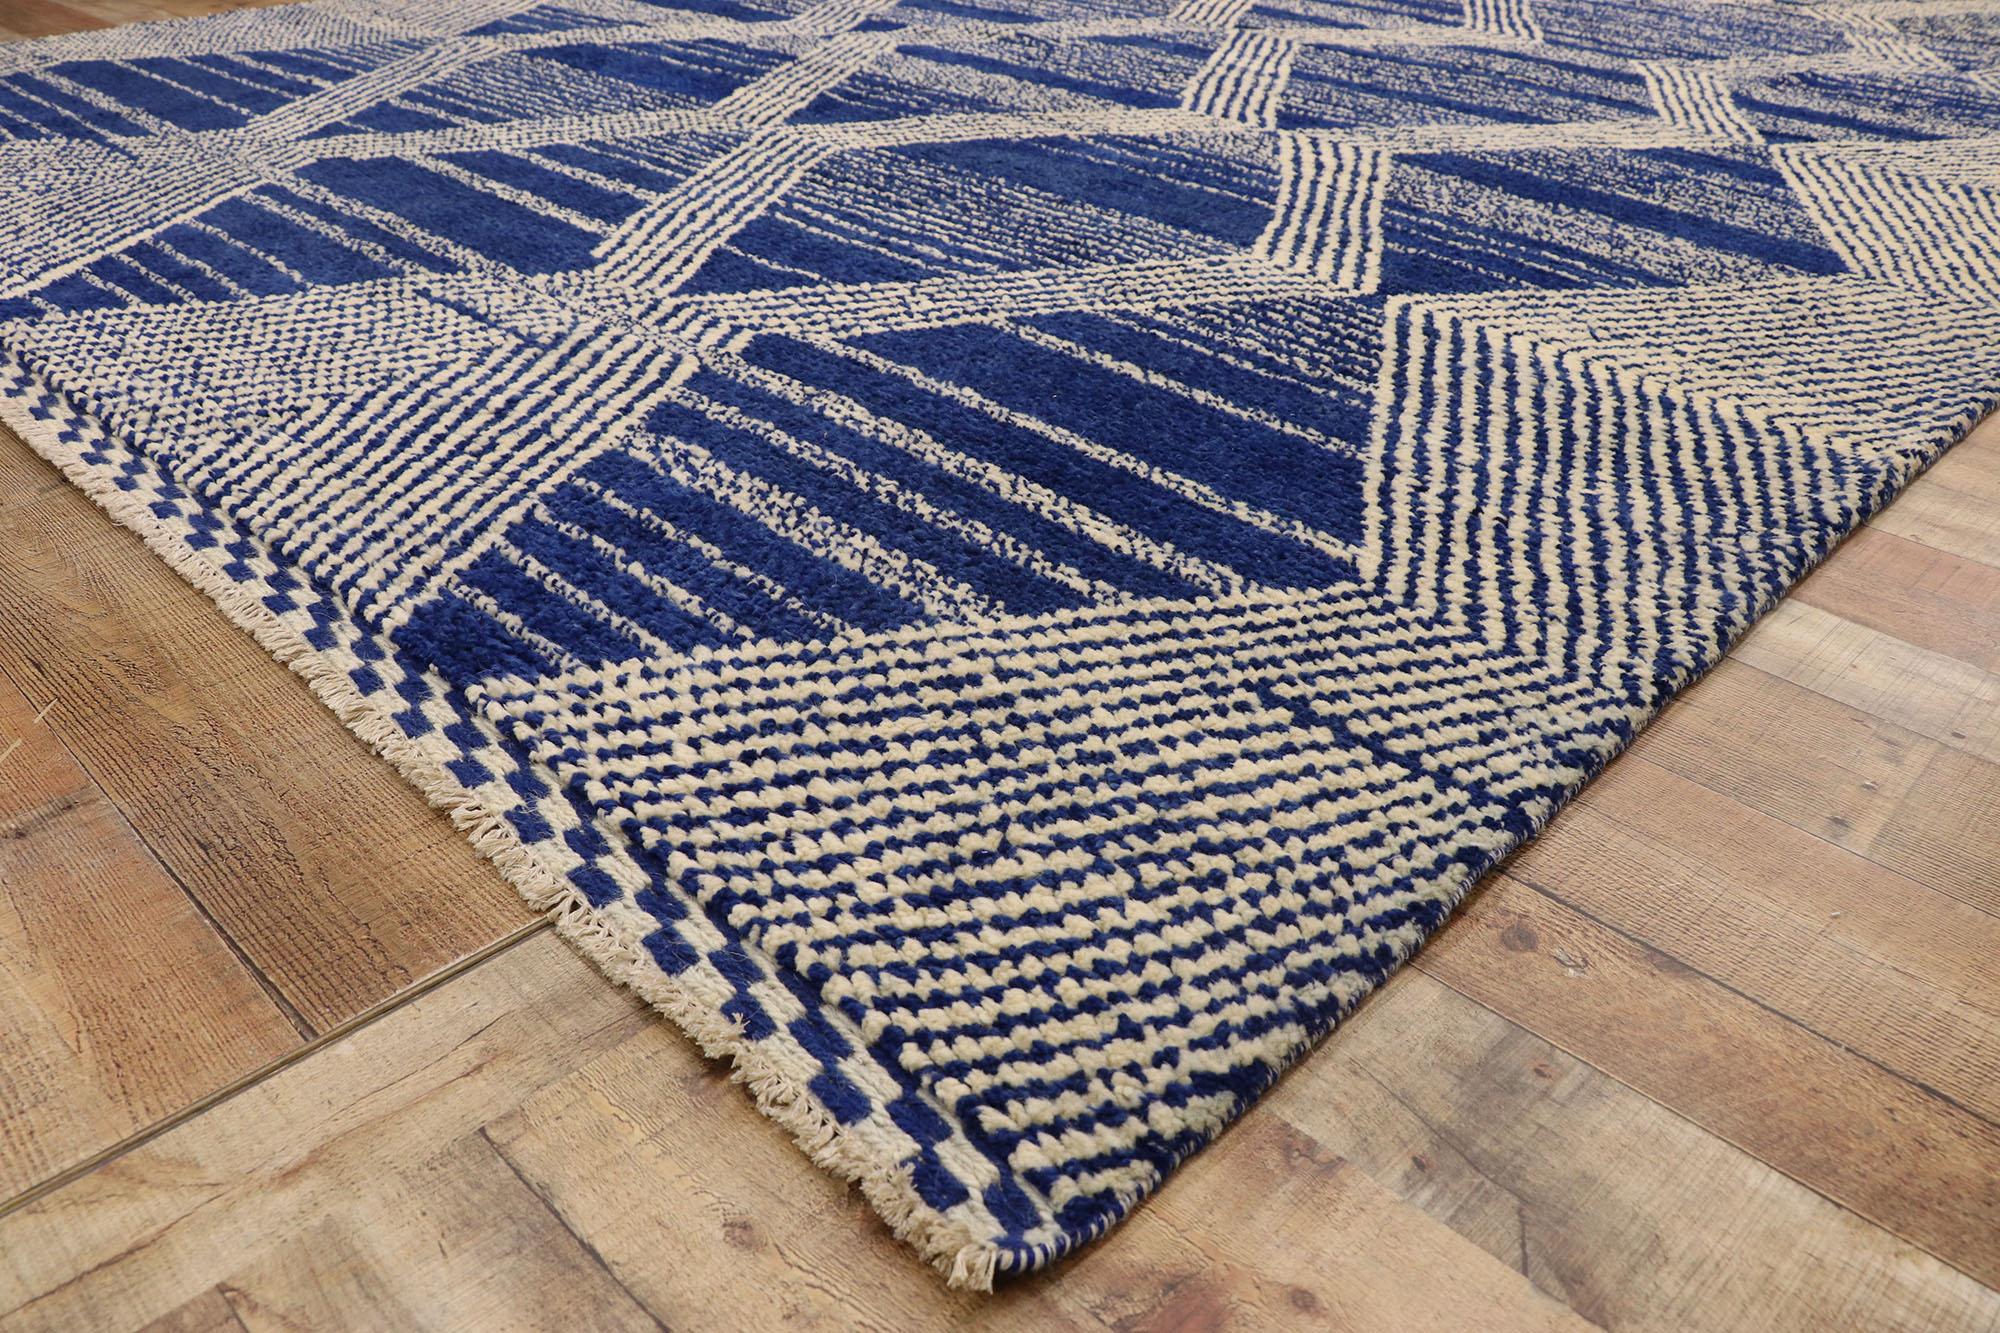 Large Blue Modern Moroccan Rug, Cozy Nomad Meets Deconstructivist Style In New Condition For Sale In Dallas, TX